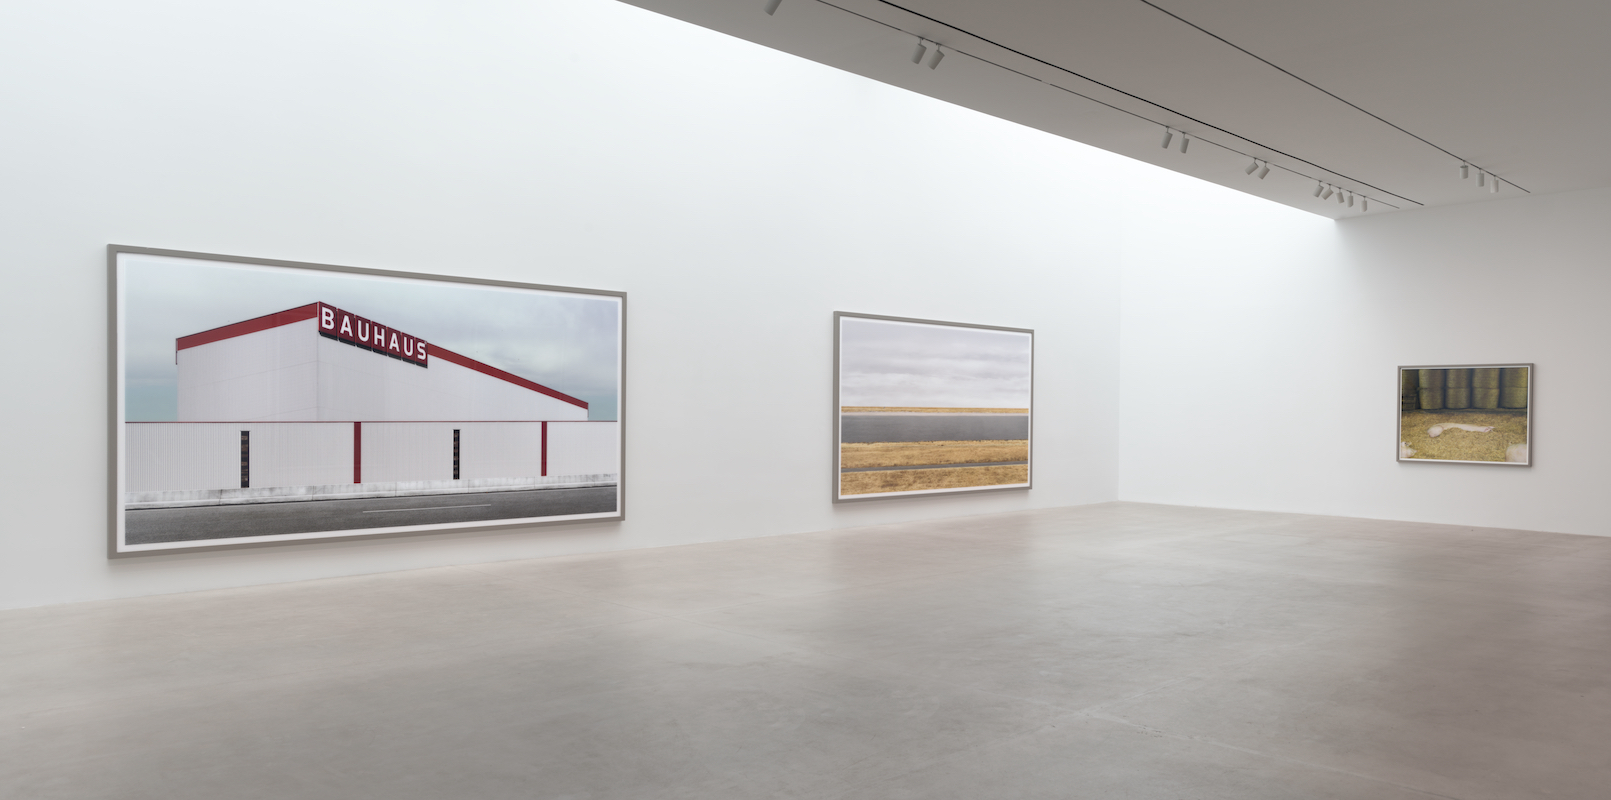 Andreas Gursky, Installation view, 2022
Artworks © Andreas Gursky/Artists Rights Society (ARS), New York
Photo: Rob McKeever
Courtesy Gagosian